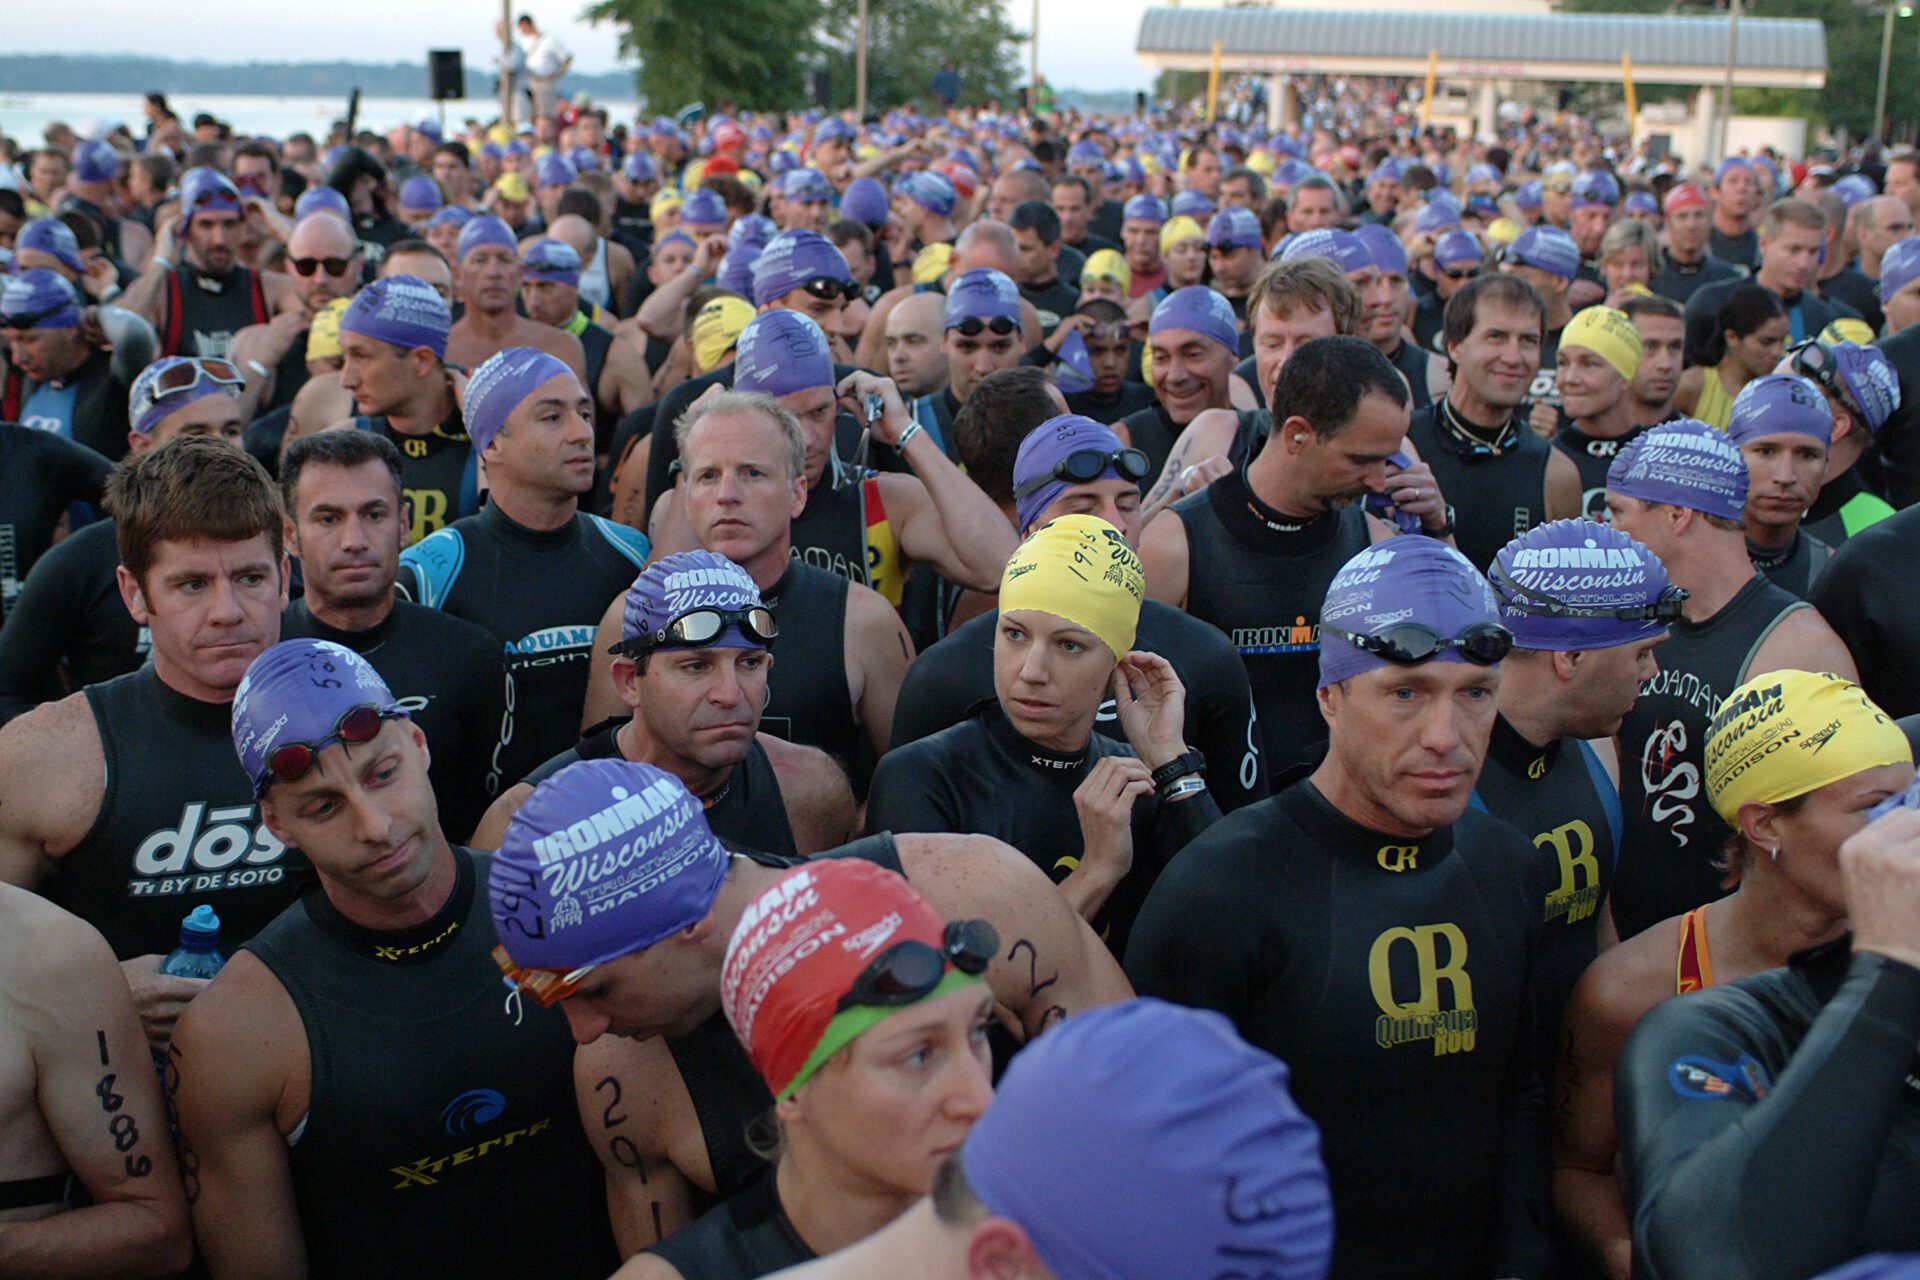 Triathletes are shown preparing for the swim portion of the triathlon in wisconsin.  They wear purple swim caps and stand together in a crowd ready to max out their training thresholds for the race.